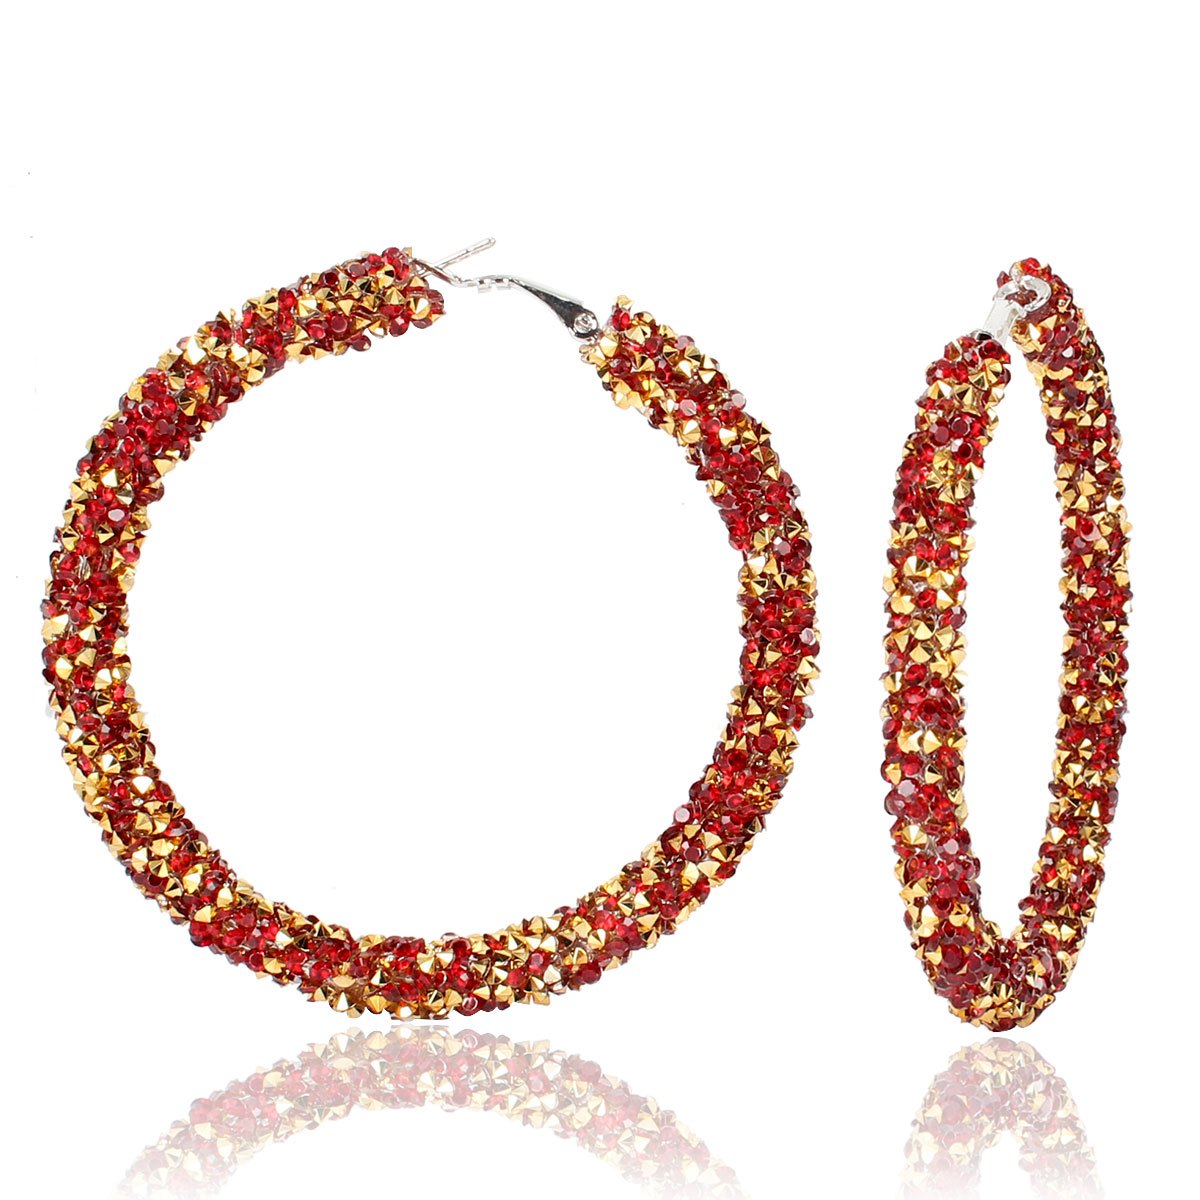 Sparkling Personality Alloy Rhinestone Hoop Earrings for Women - Perfect for Holiday Parties and Vacations